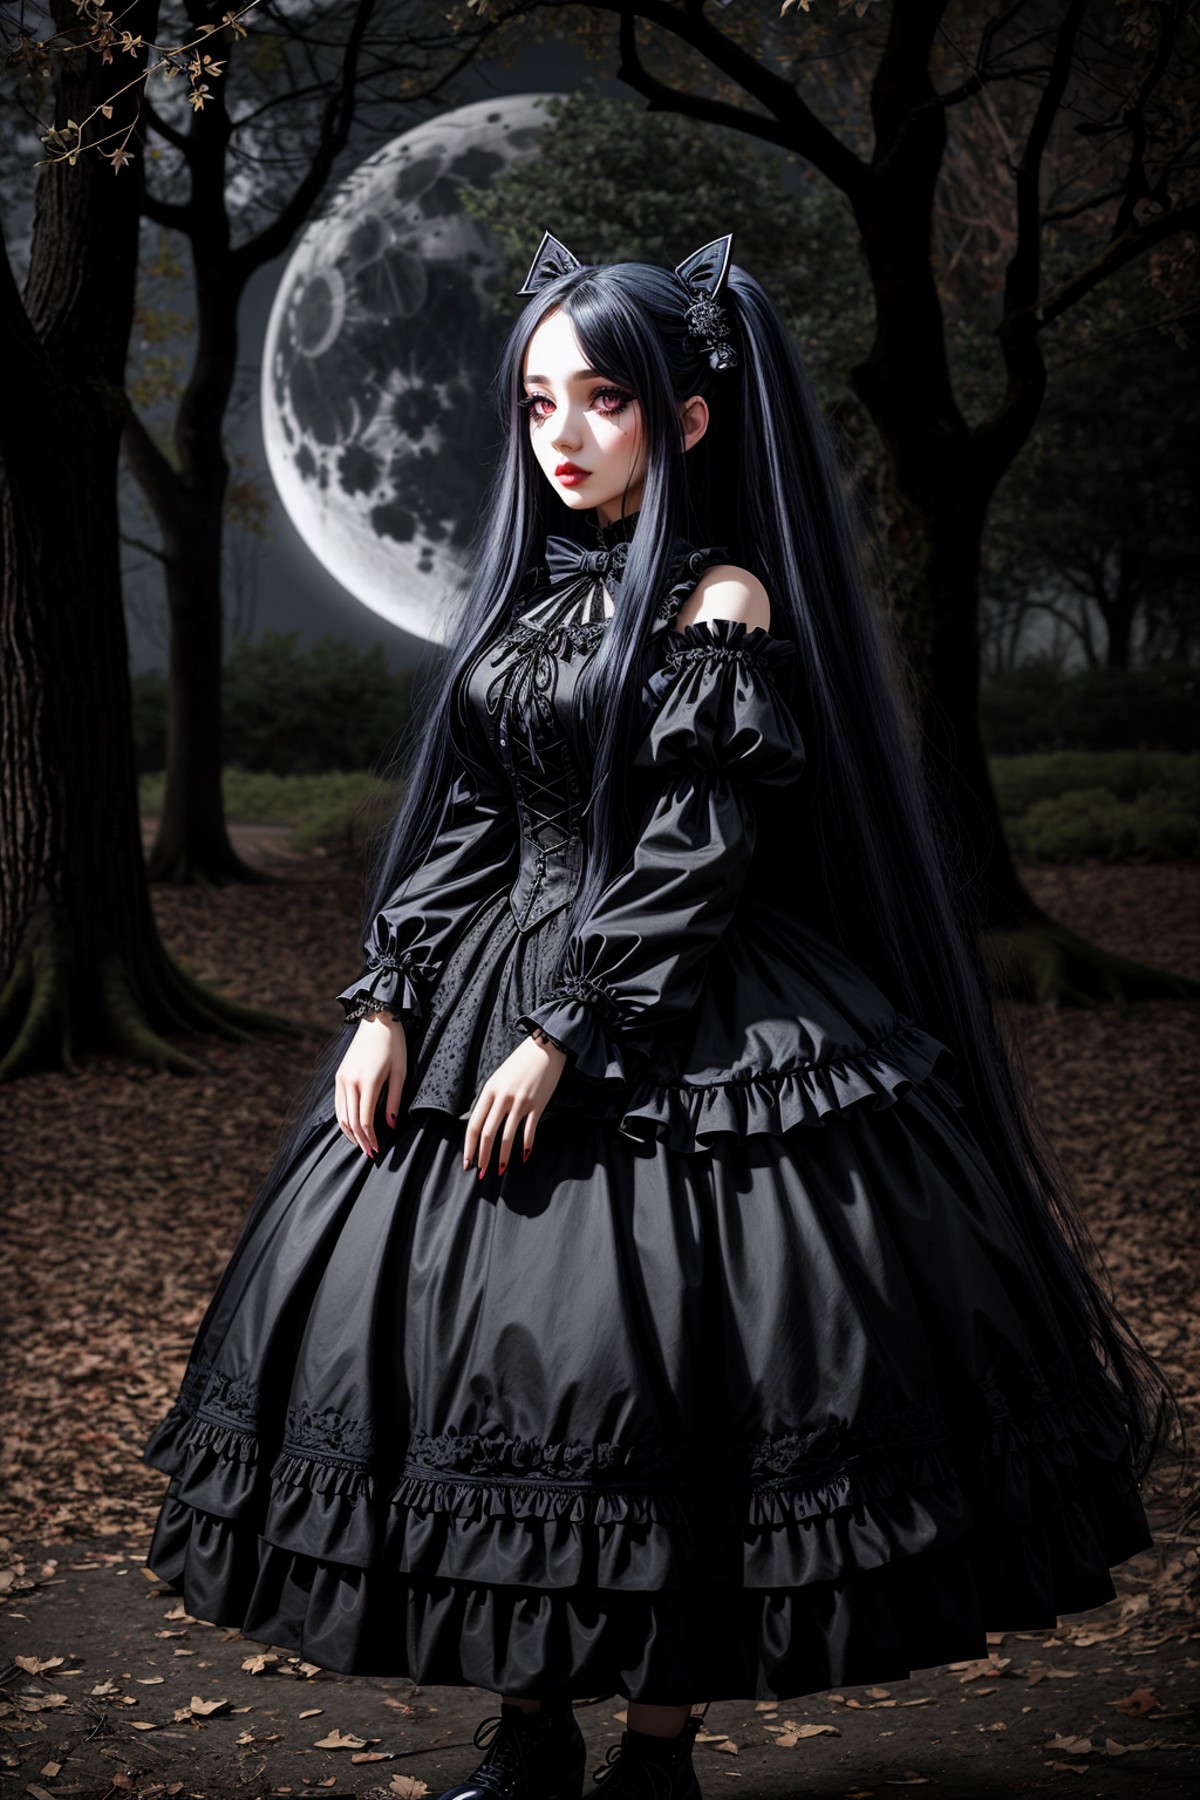 ((Masterpiece, best quality)), edgQuality,
GothGal, a woman with long hair and a dress posing for a picture next to a tree...